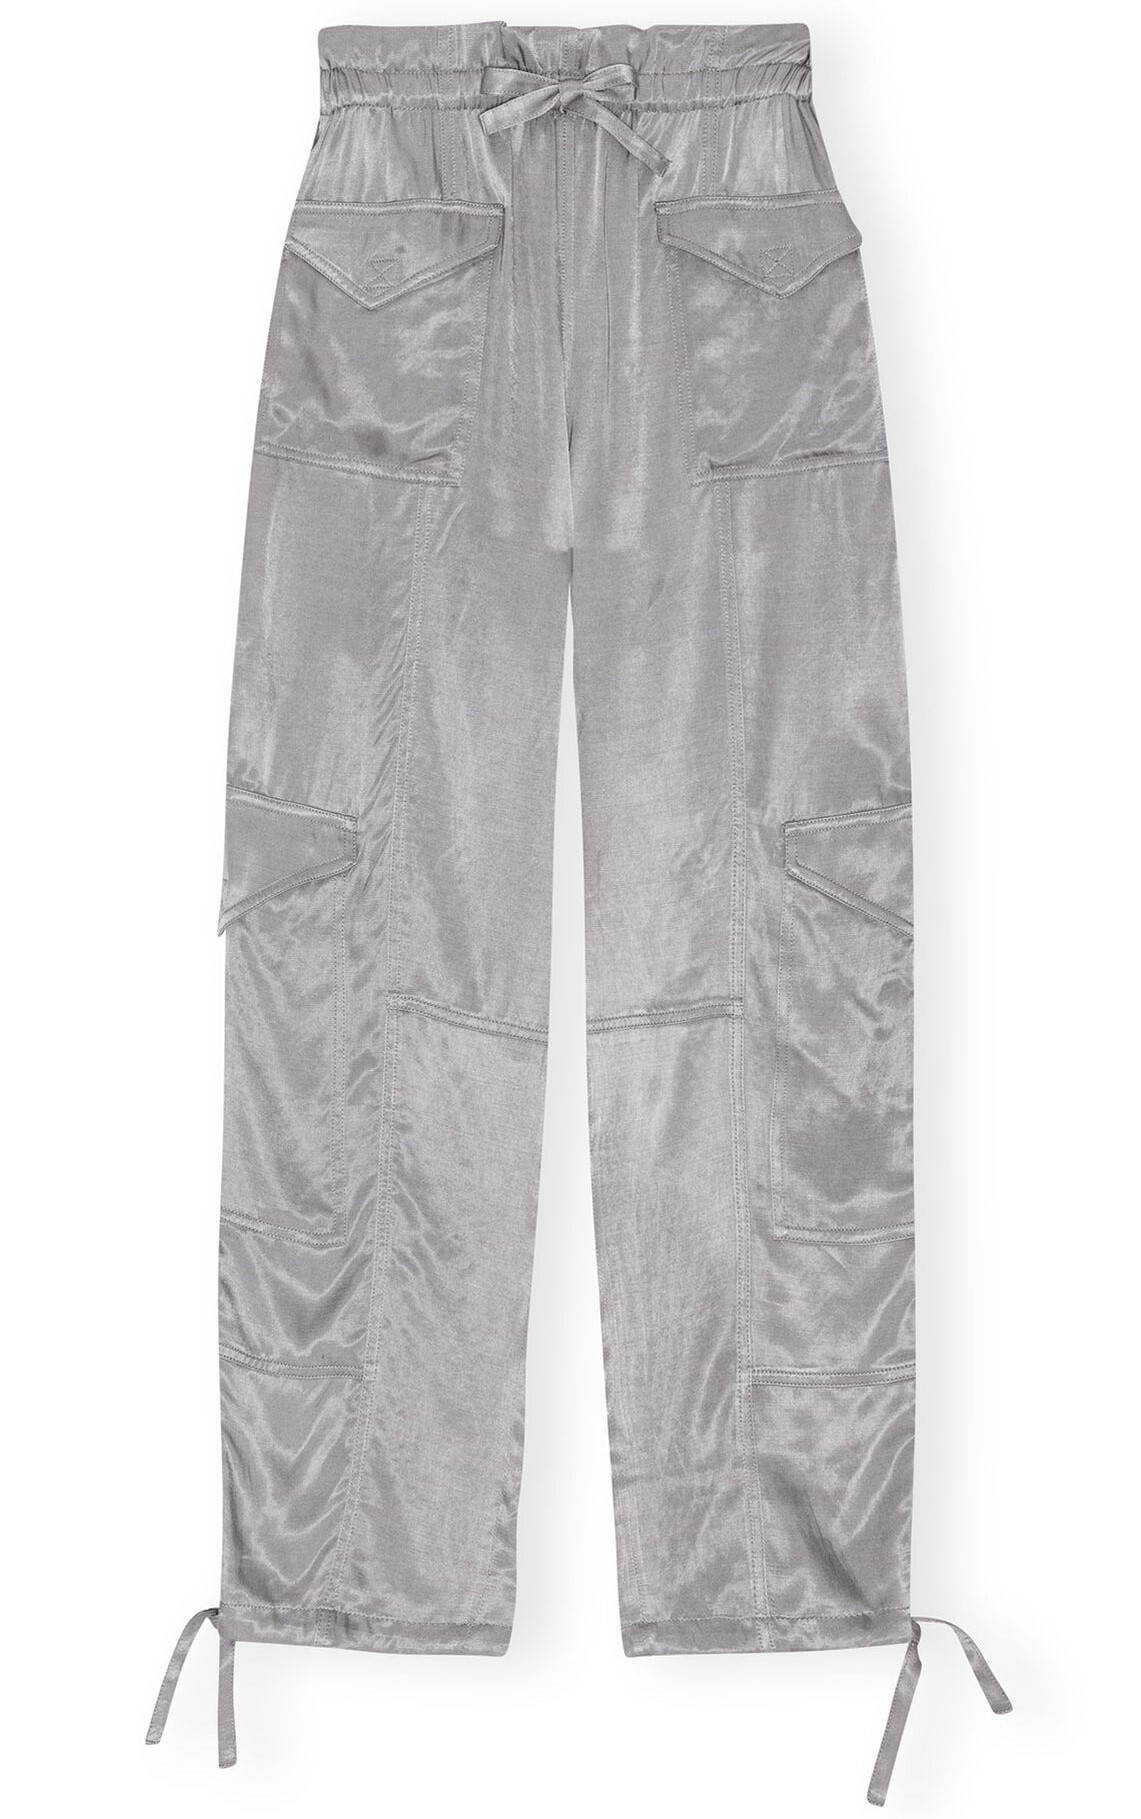 GANNI Washed Satin Pant in Frost Gray